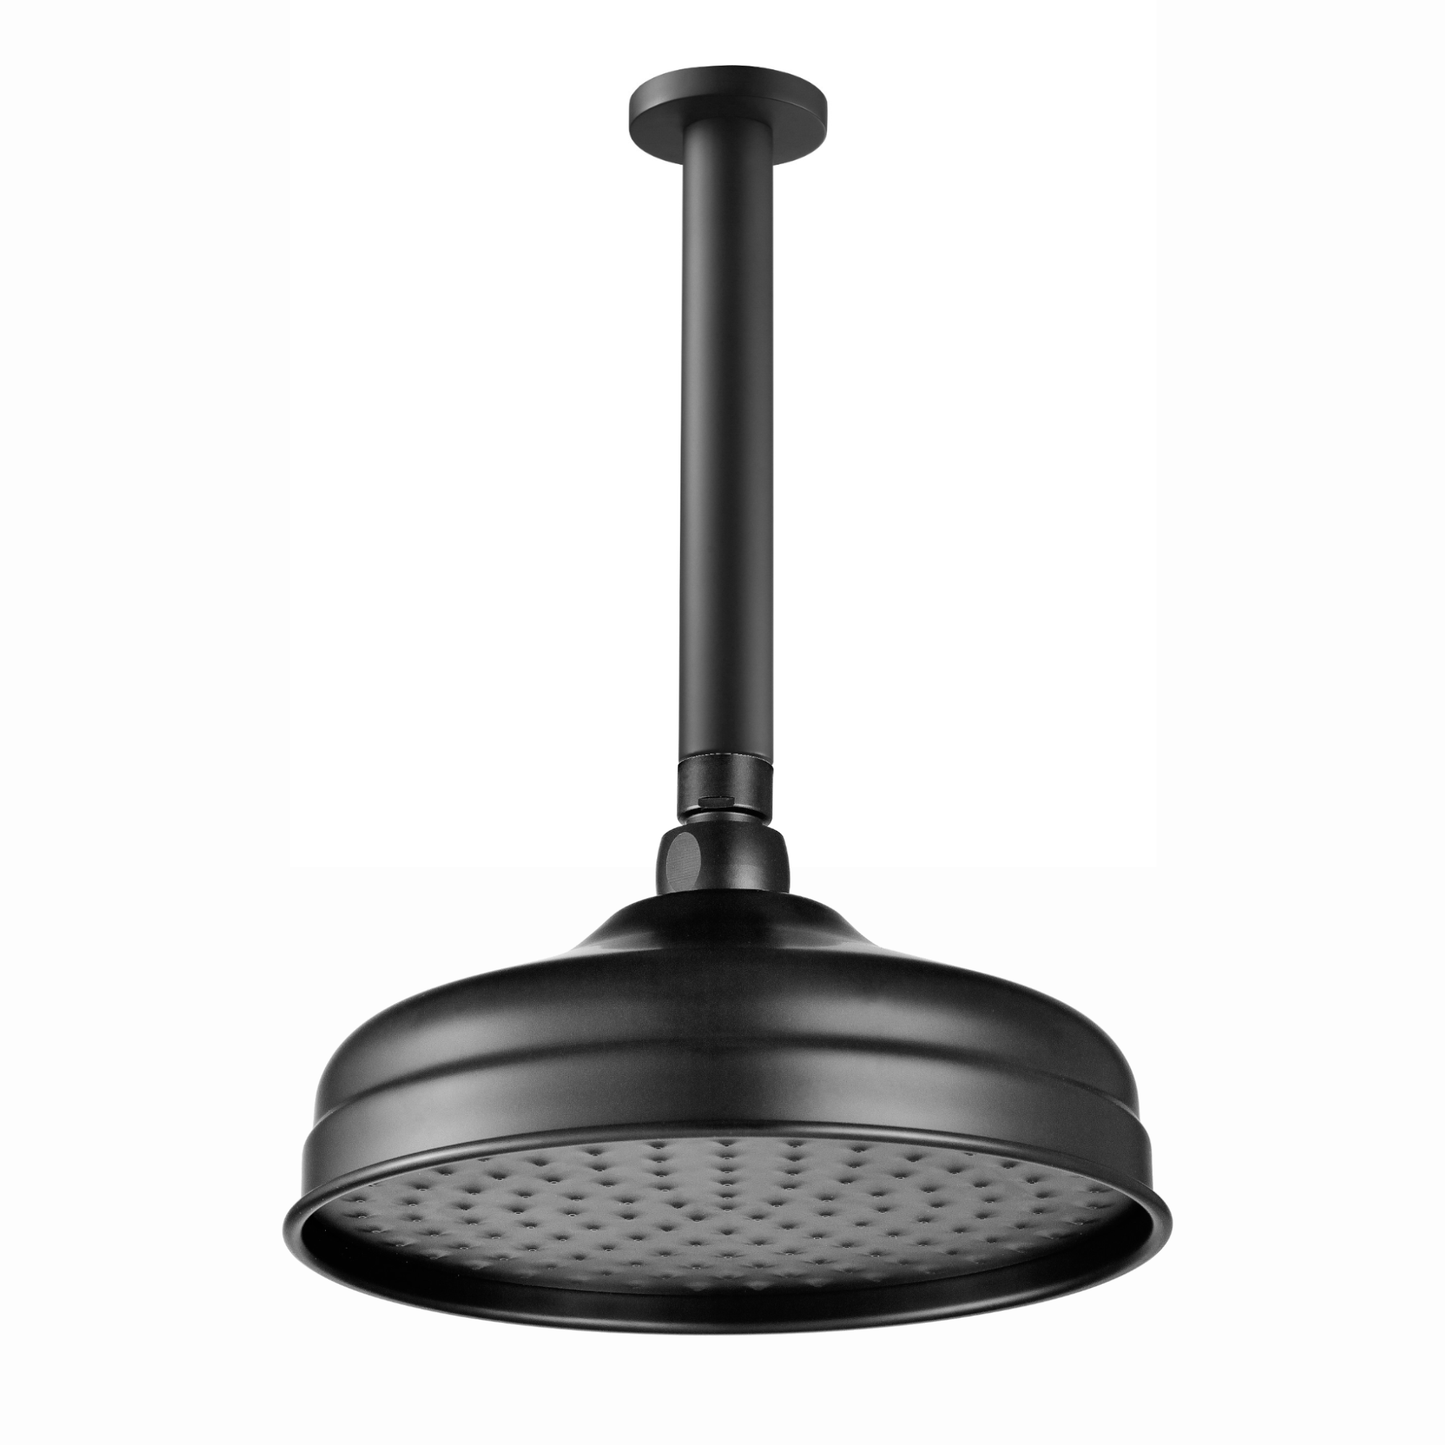 Traditional Ceiling Fixed Apron Brass Shower Head 8" With 180mm Ceiling Shower Arm - Black